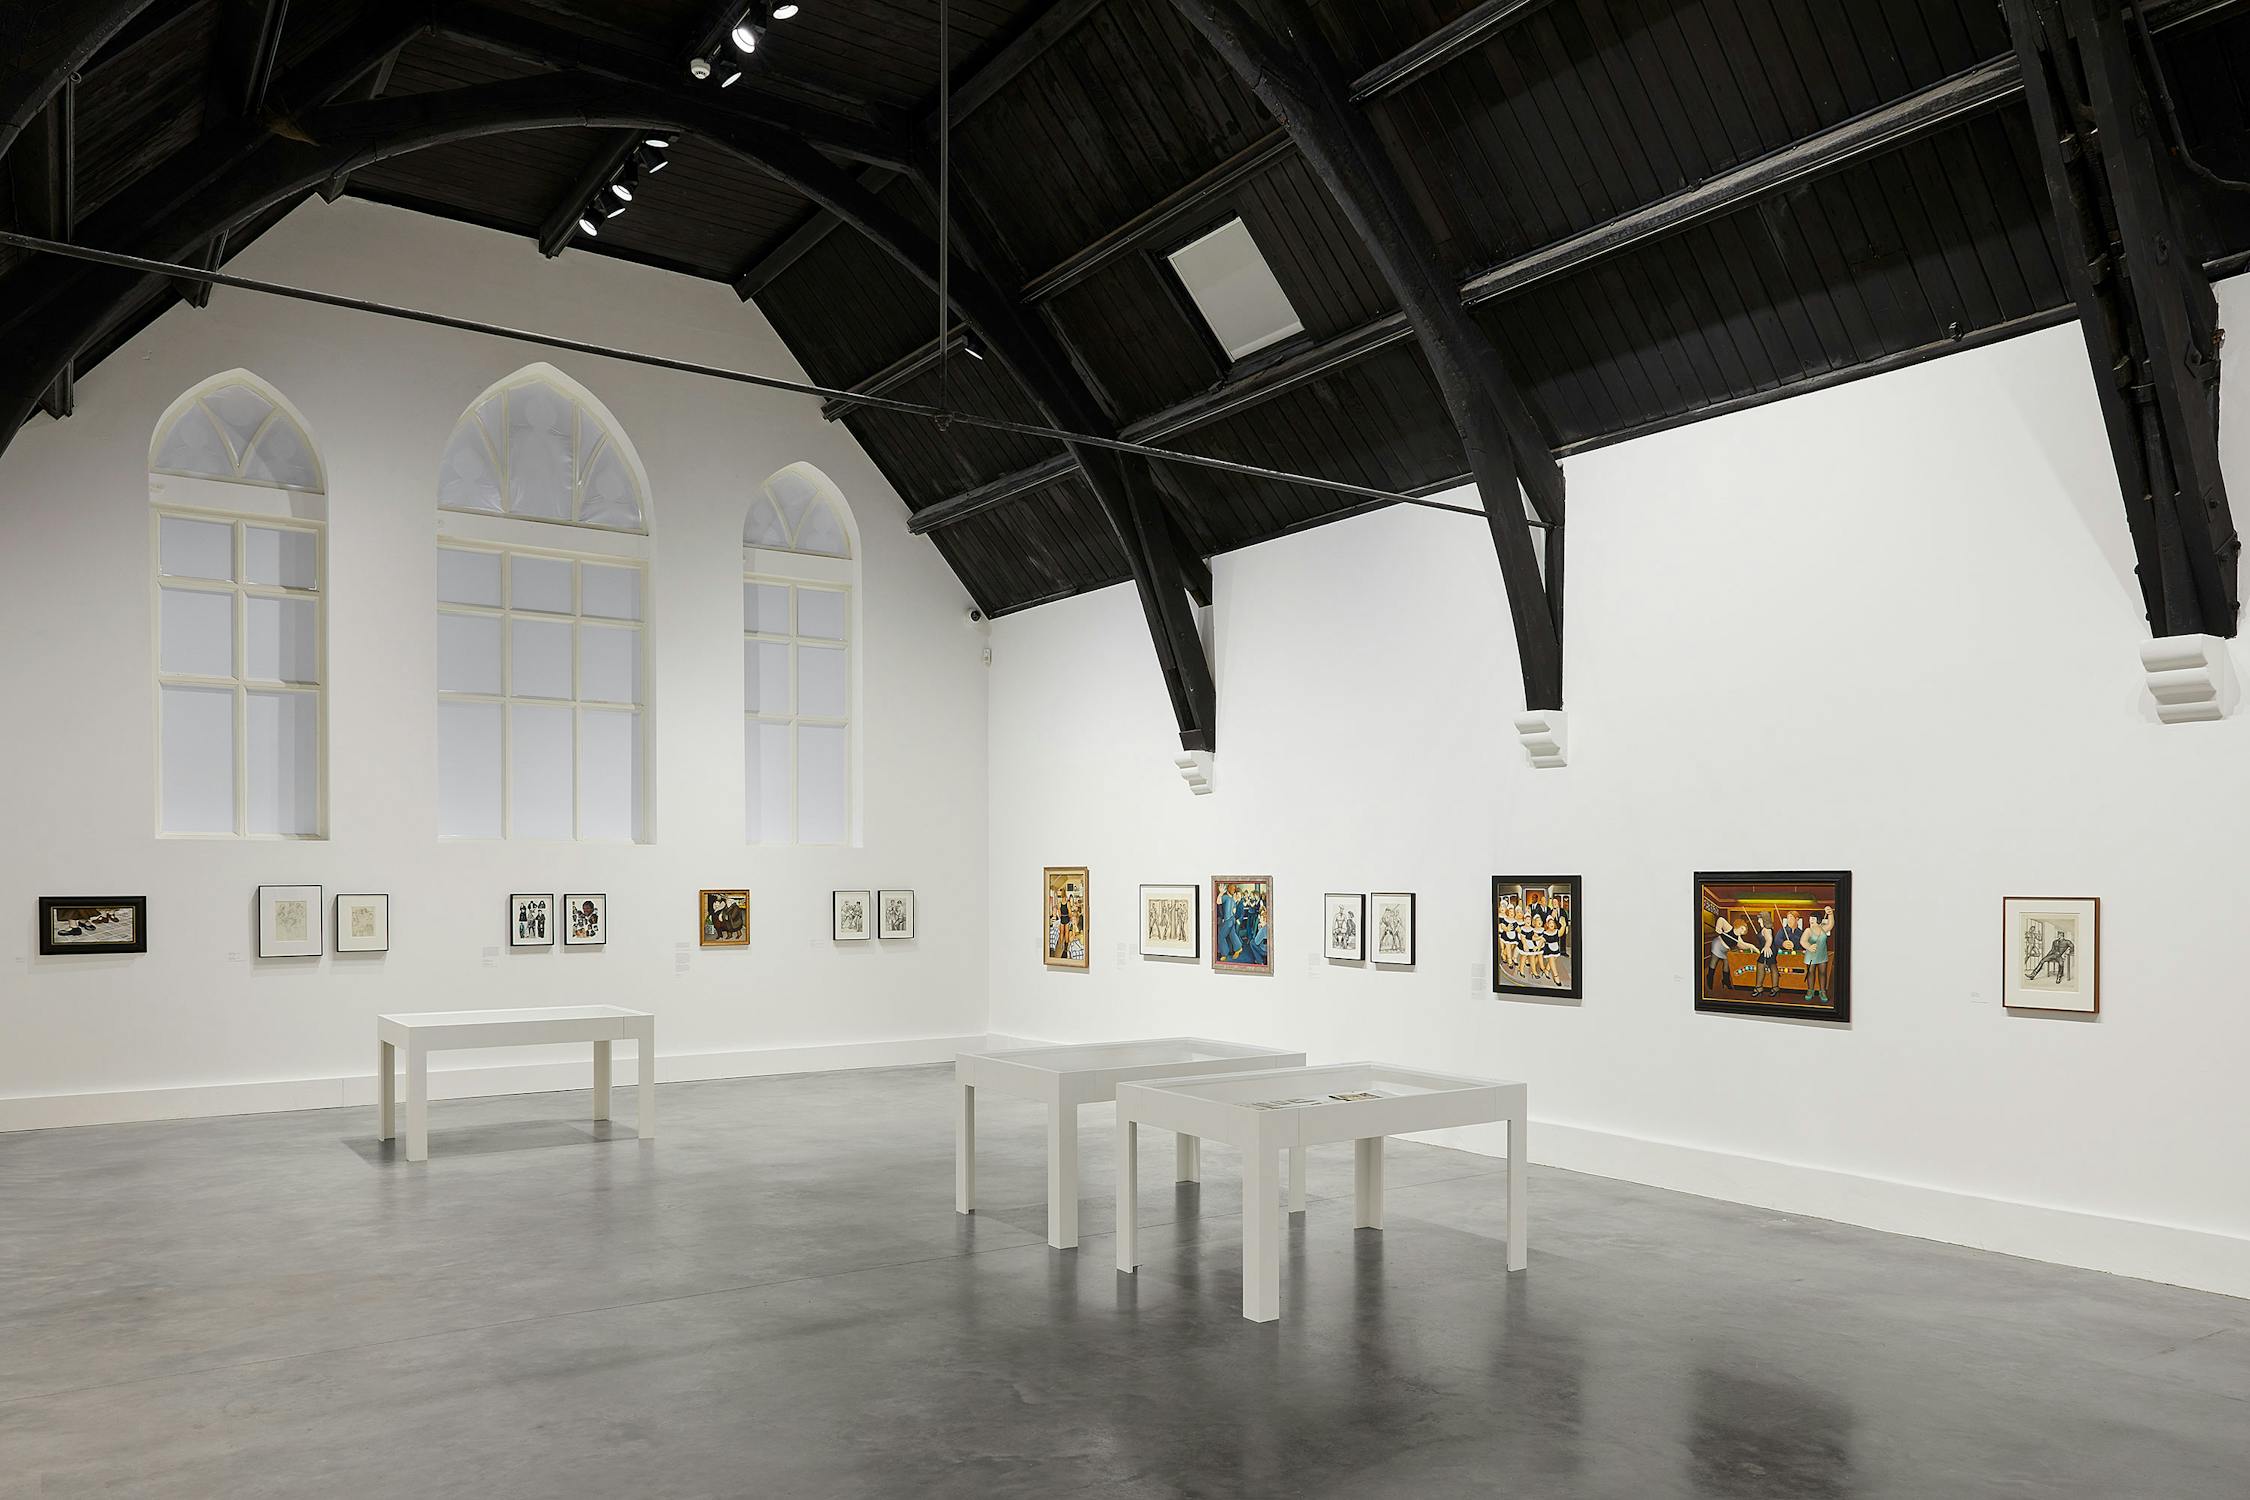 a brightly-lit gallery with white walls, dark vaulted ceiling and polished concrete floors. Artworks by Beryl Cook and Tom of Finland line the walls, and three vitrines are positioned within the space.